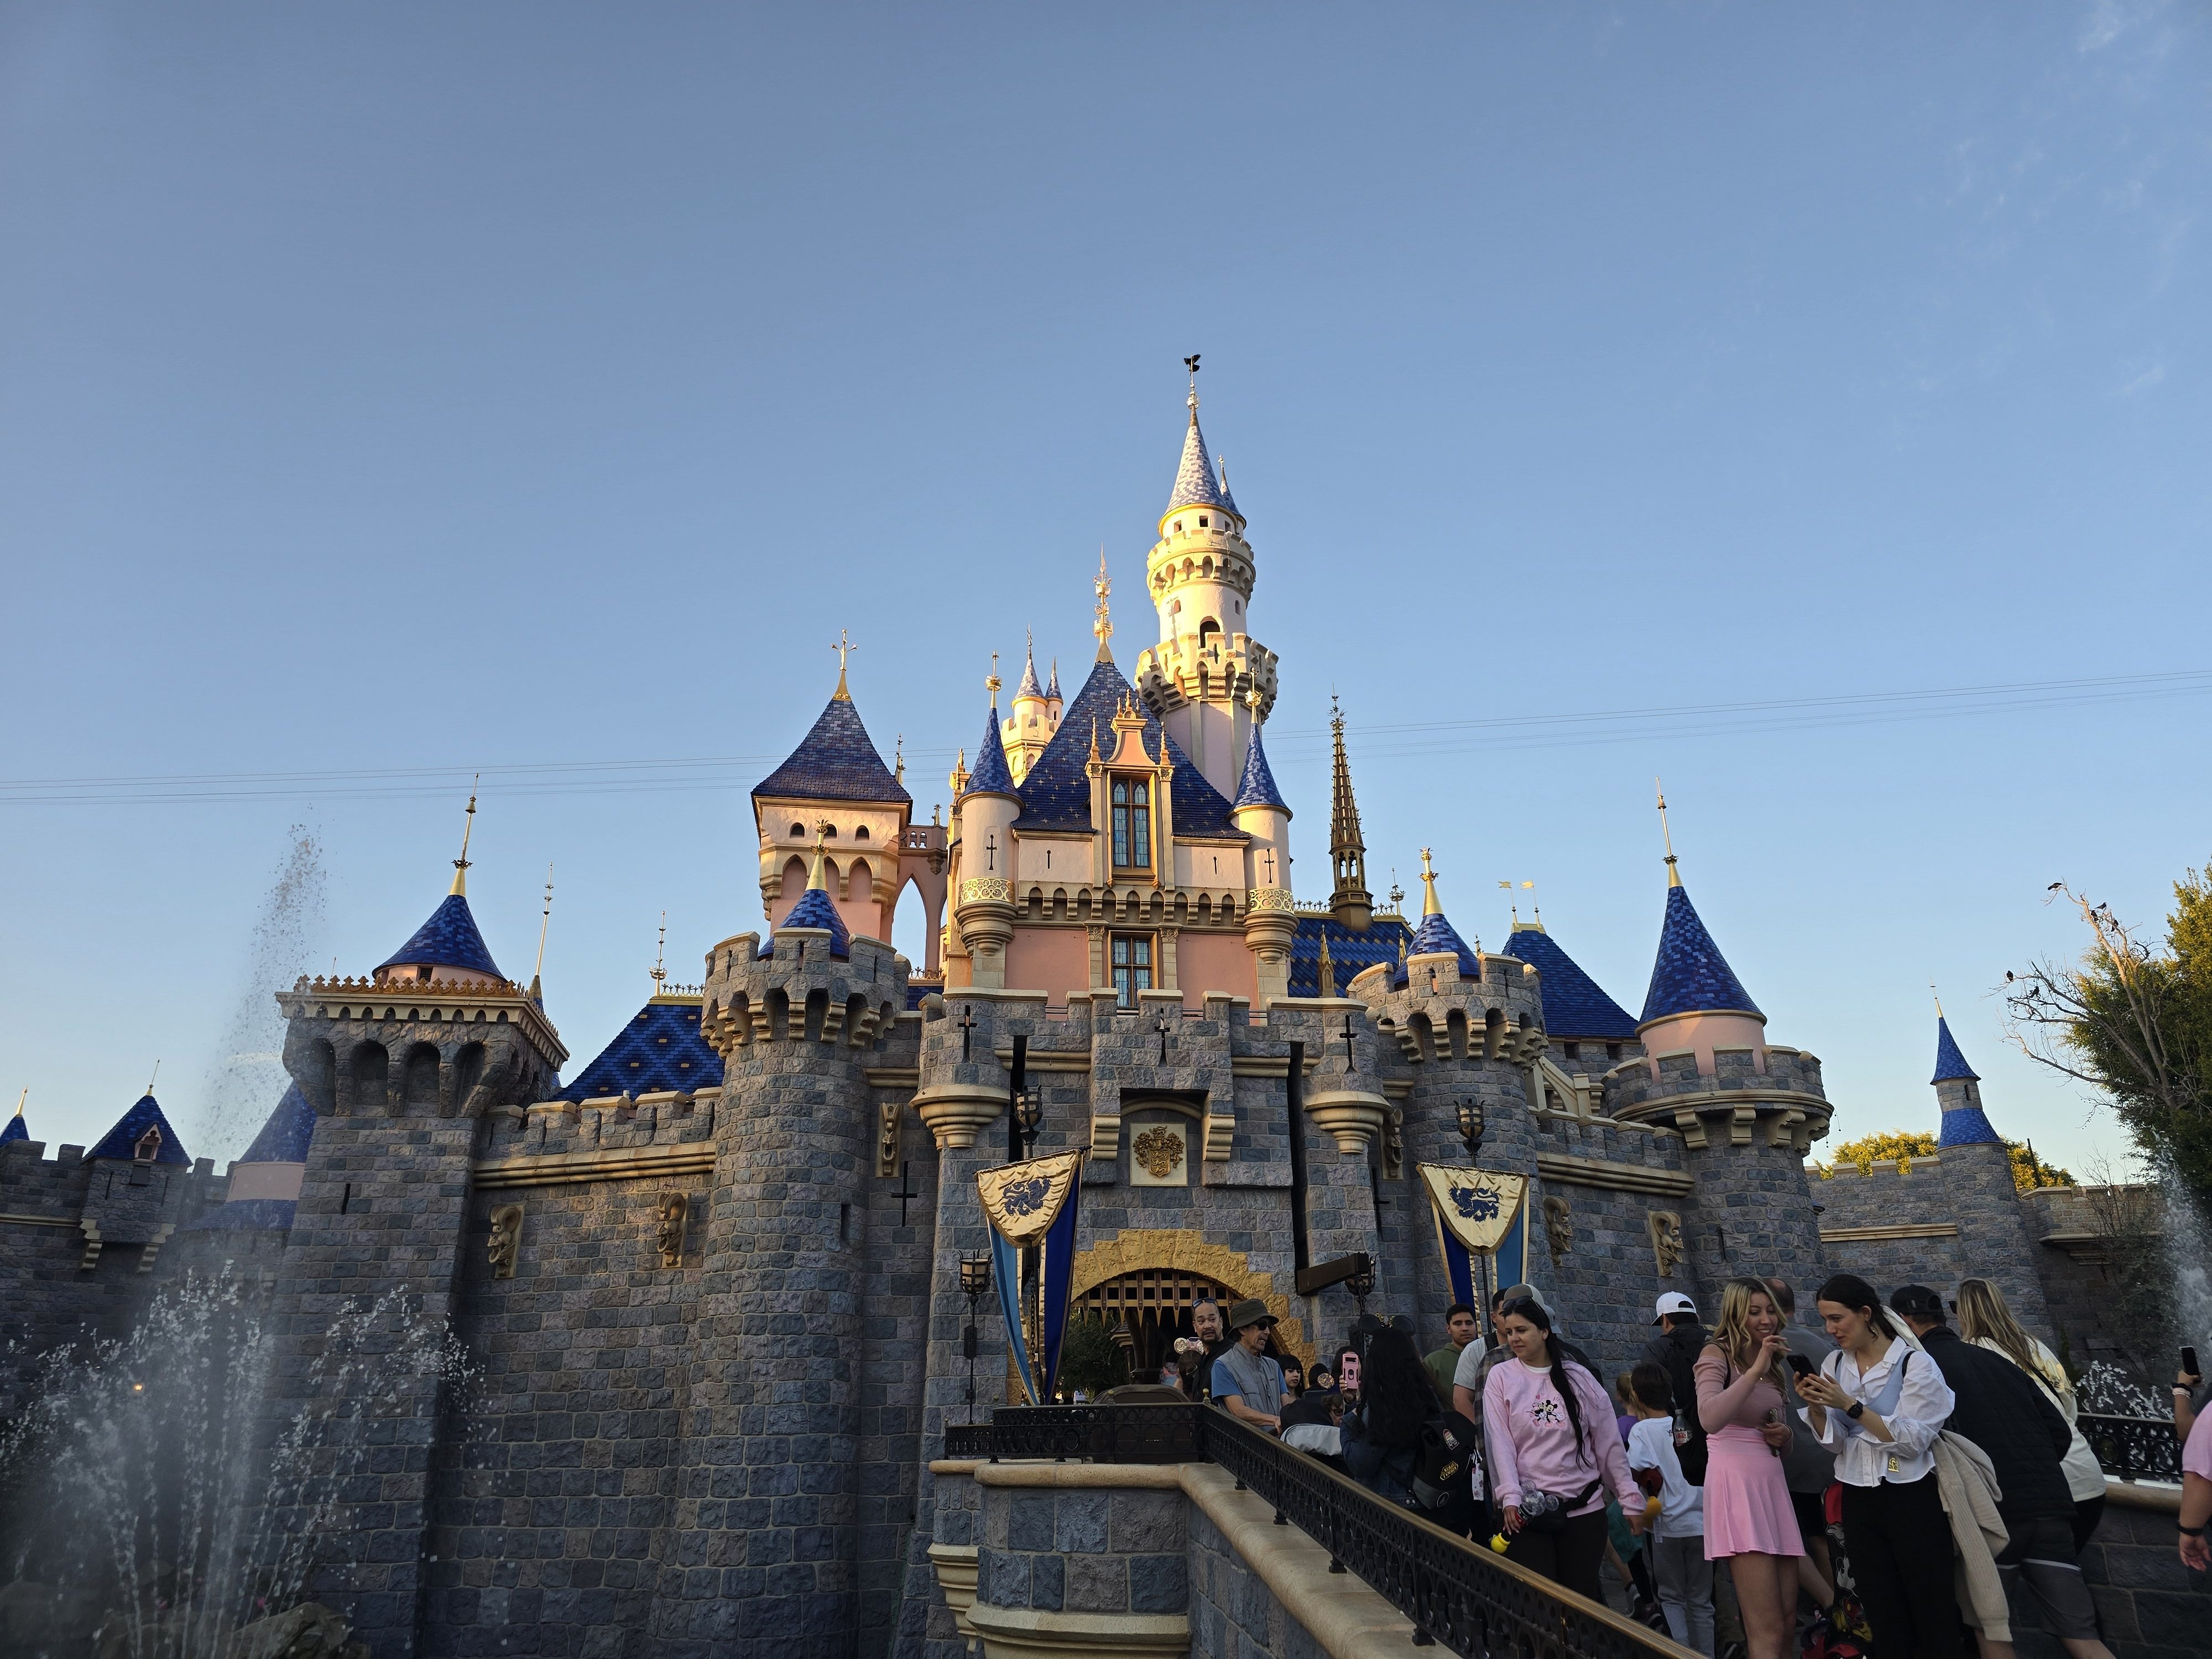 Castle at Disneyland taken with the S24 Ultra.